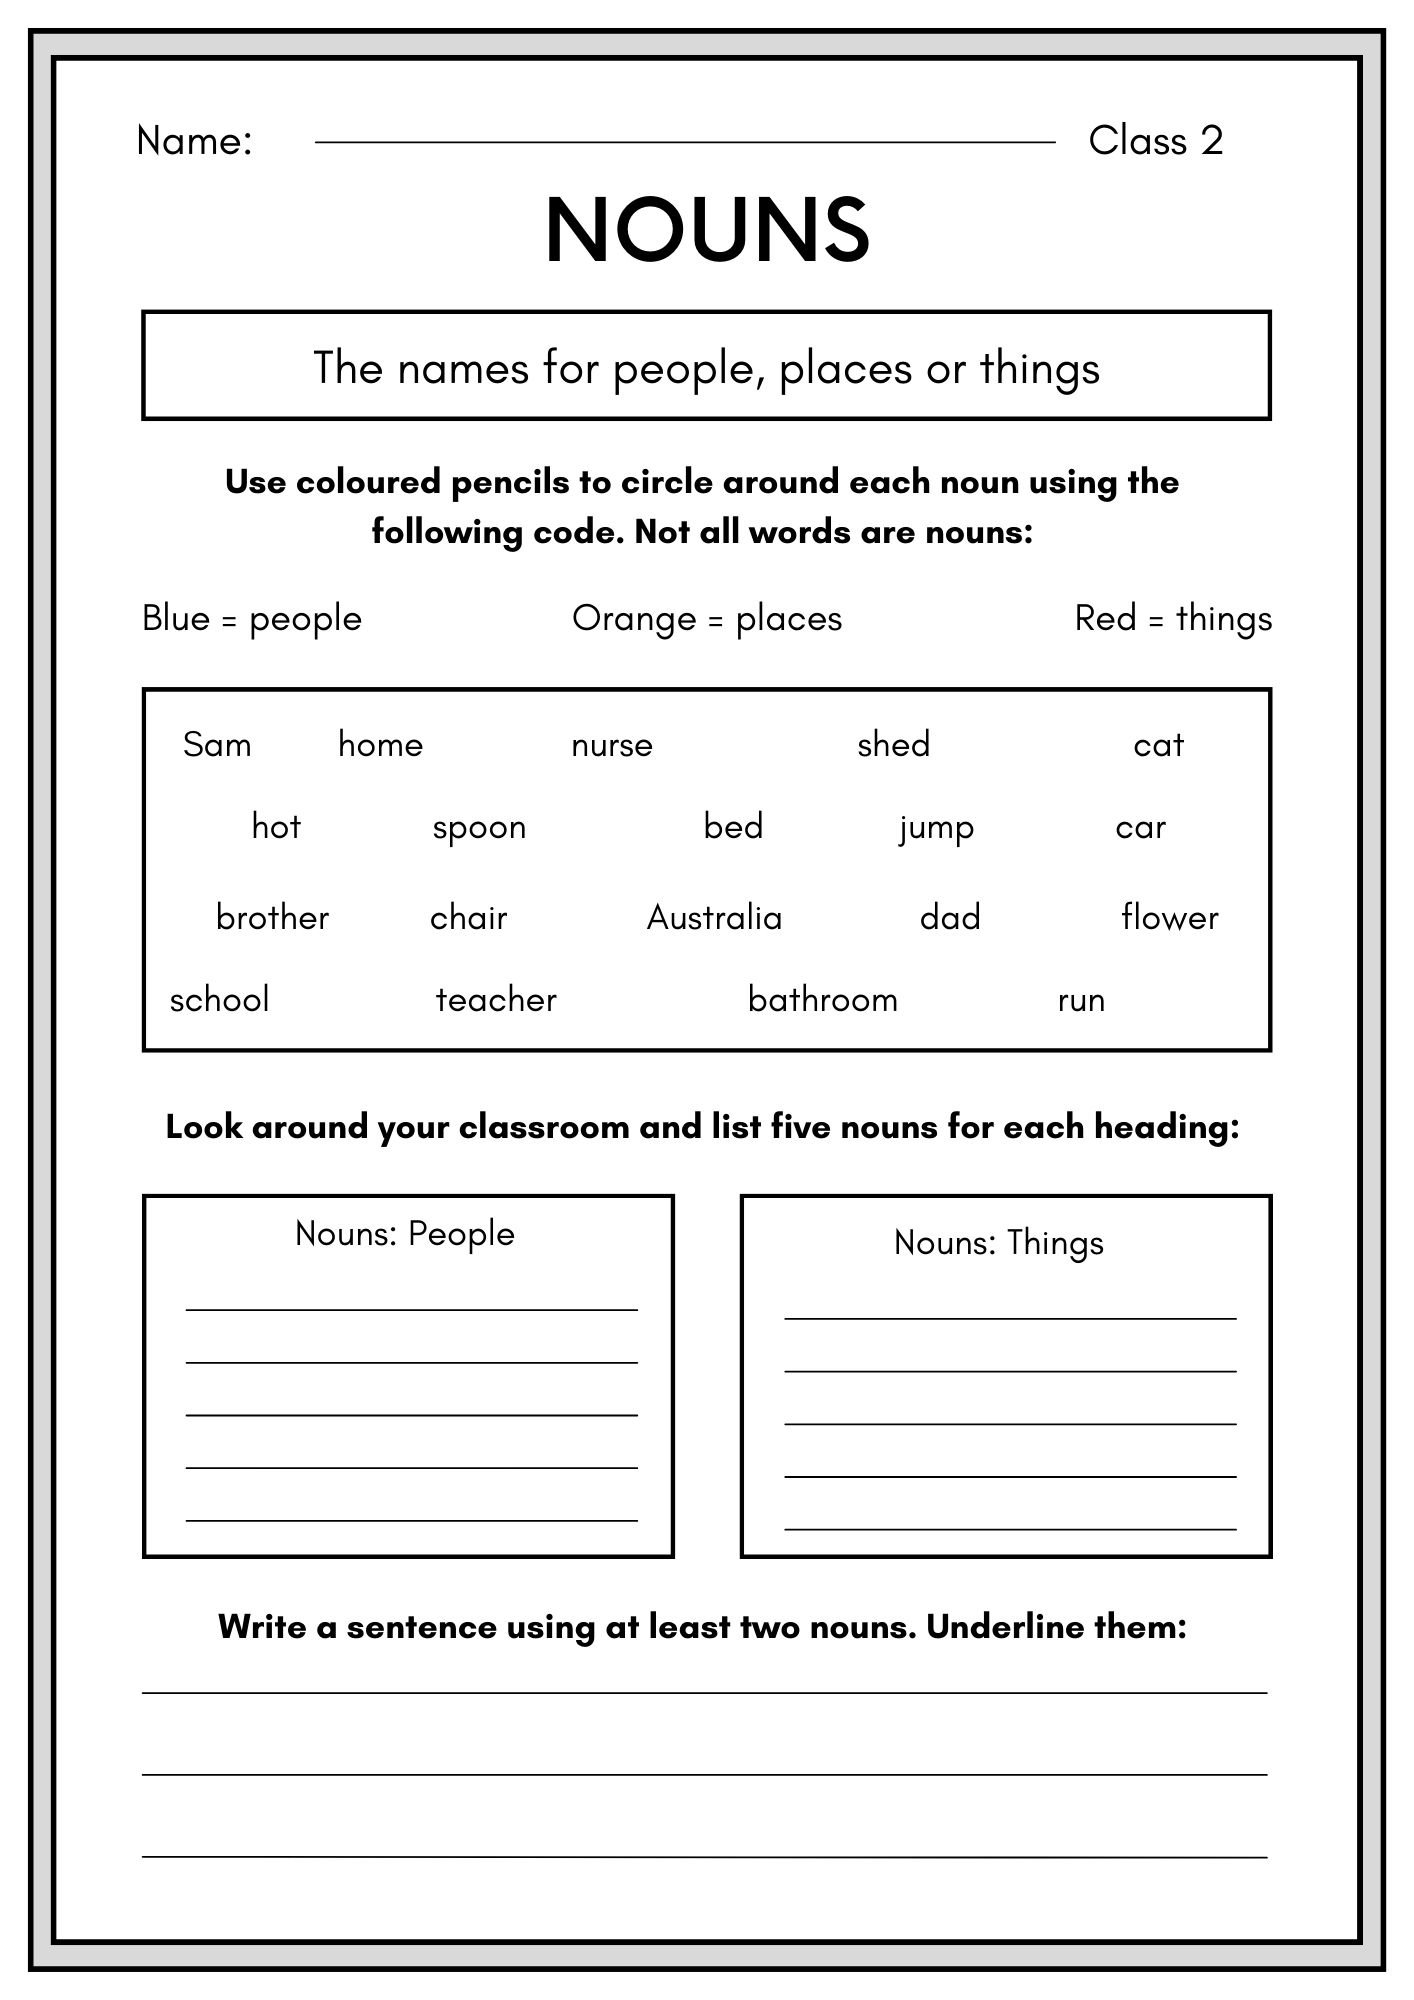 top-5-noun-worksheet-for-class-2-with-answers-pdf-2023